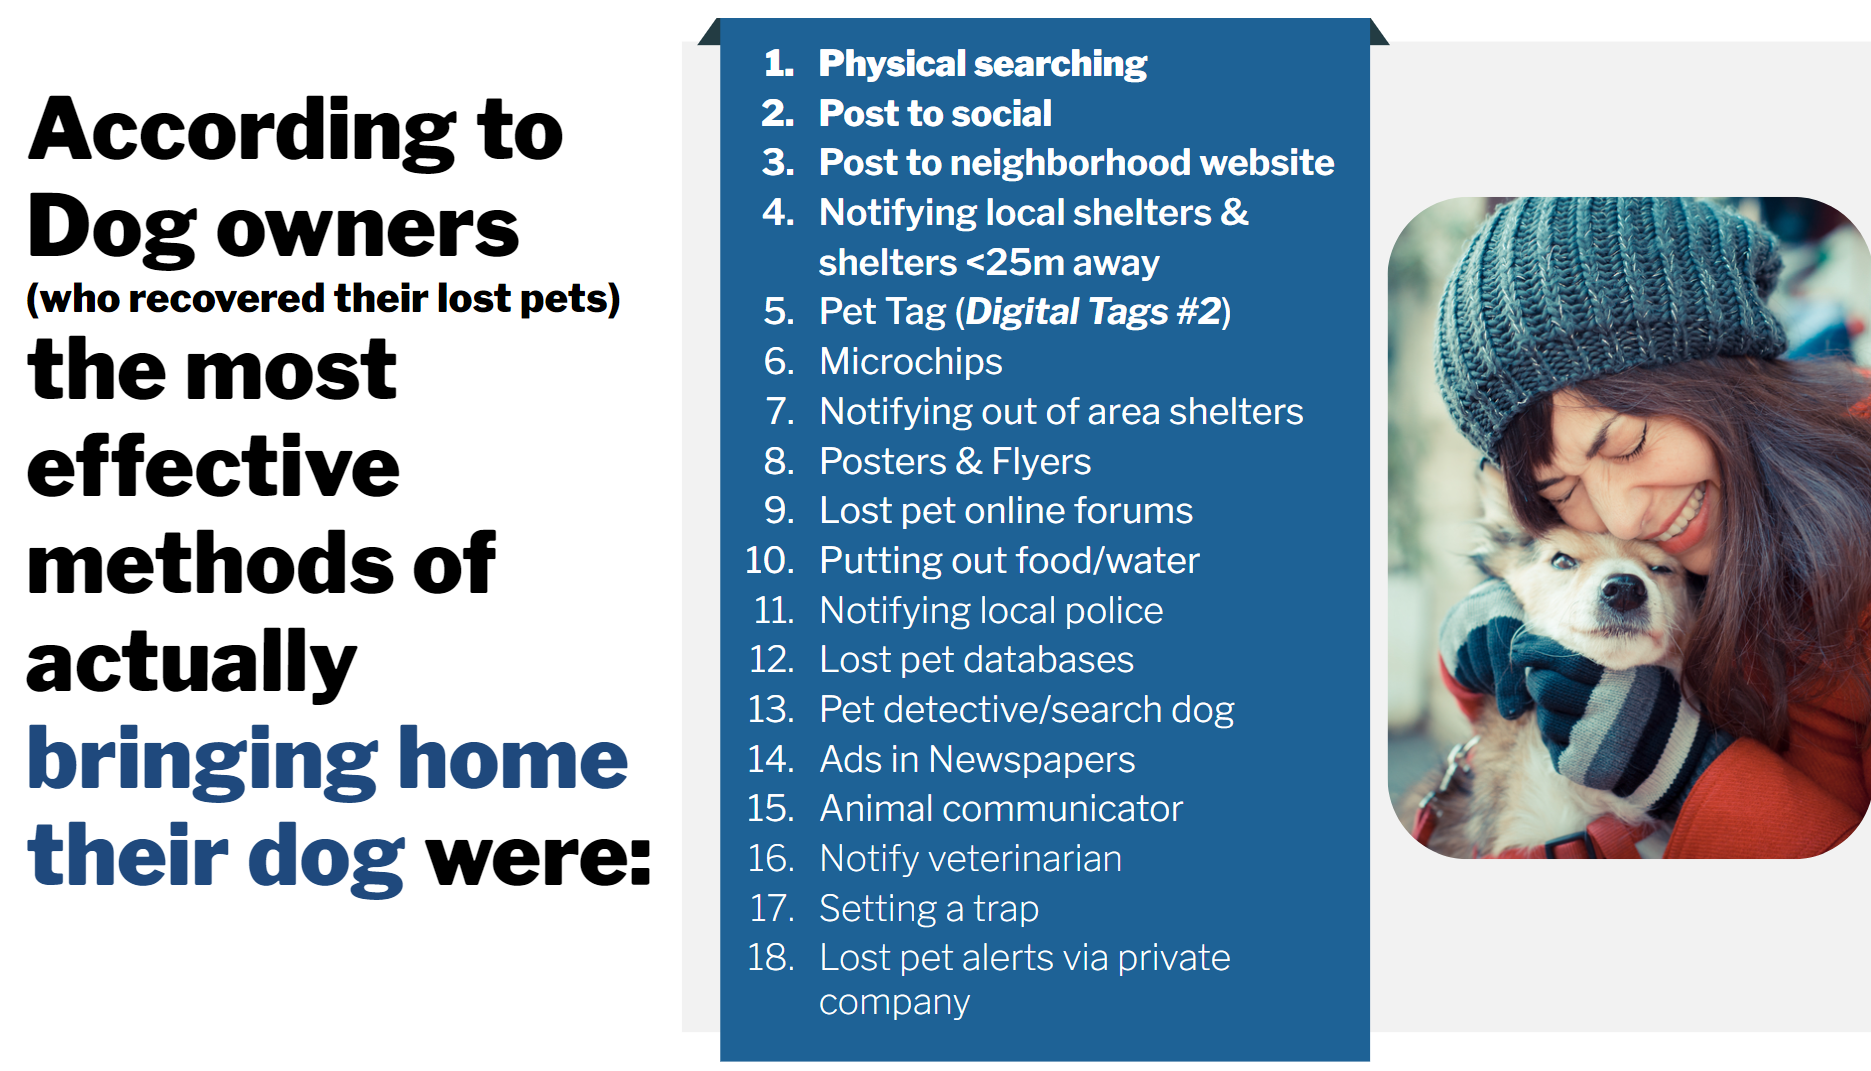 timeline image indicating the full list of methods for getting a lost pet home